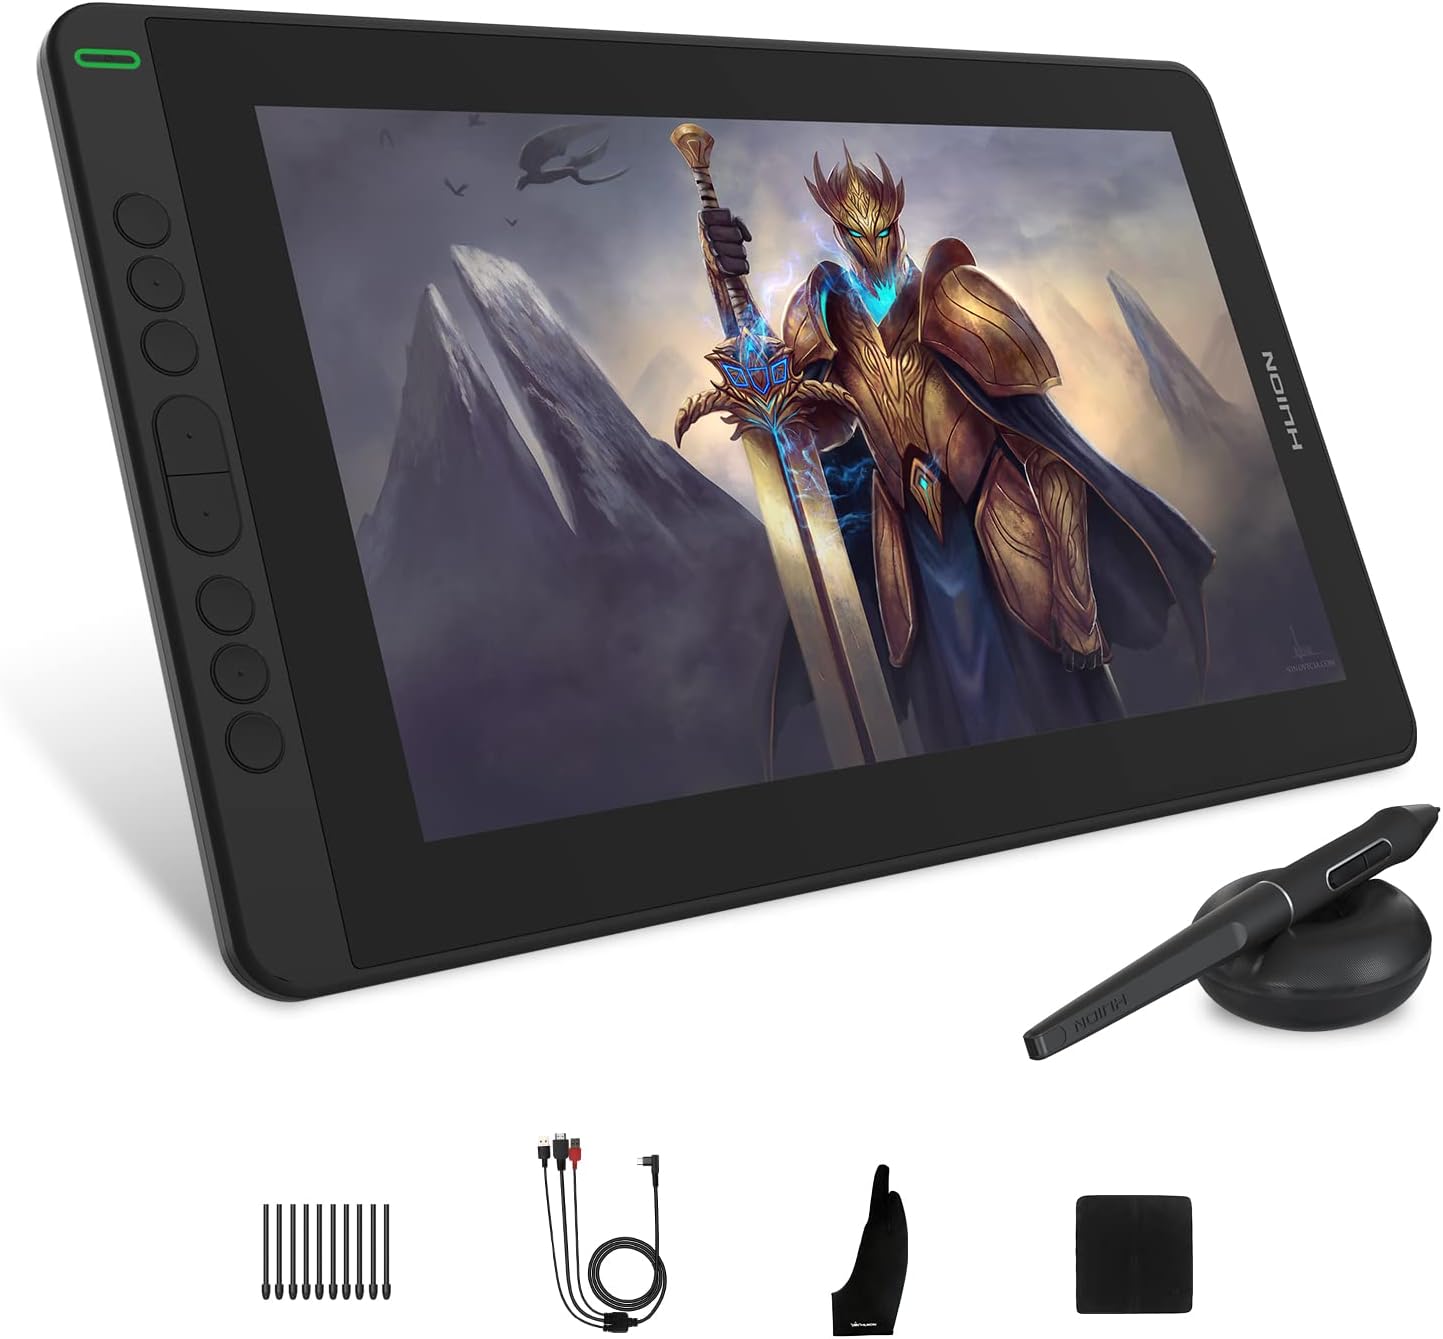 HUION KAMVAS 13 Drawing Tablet with Screen, 13.3